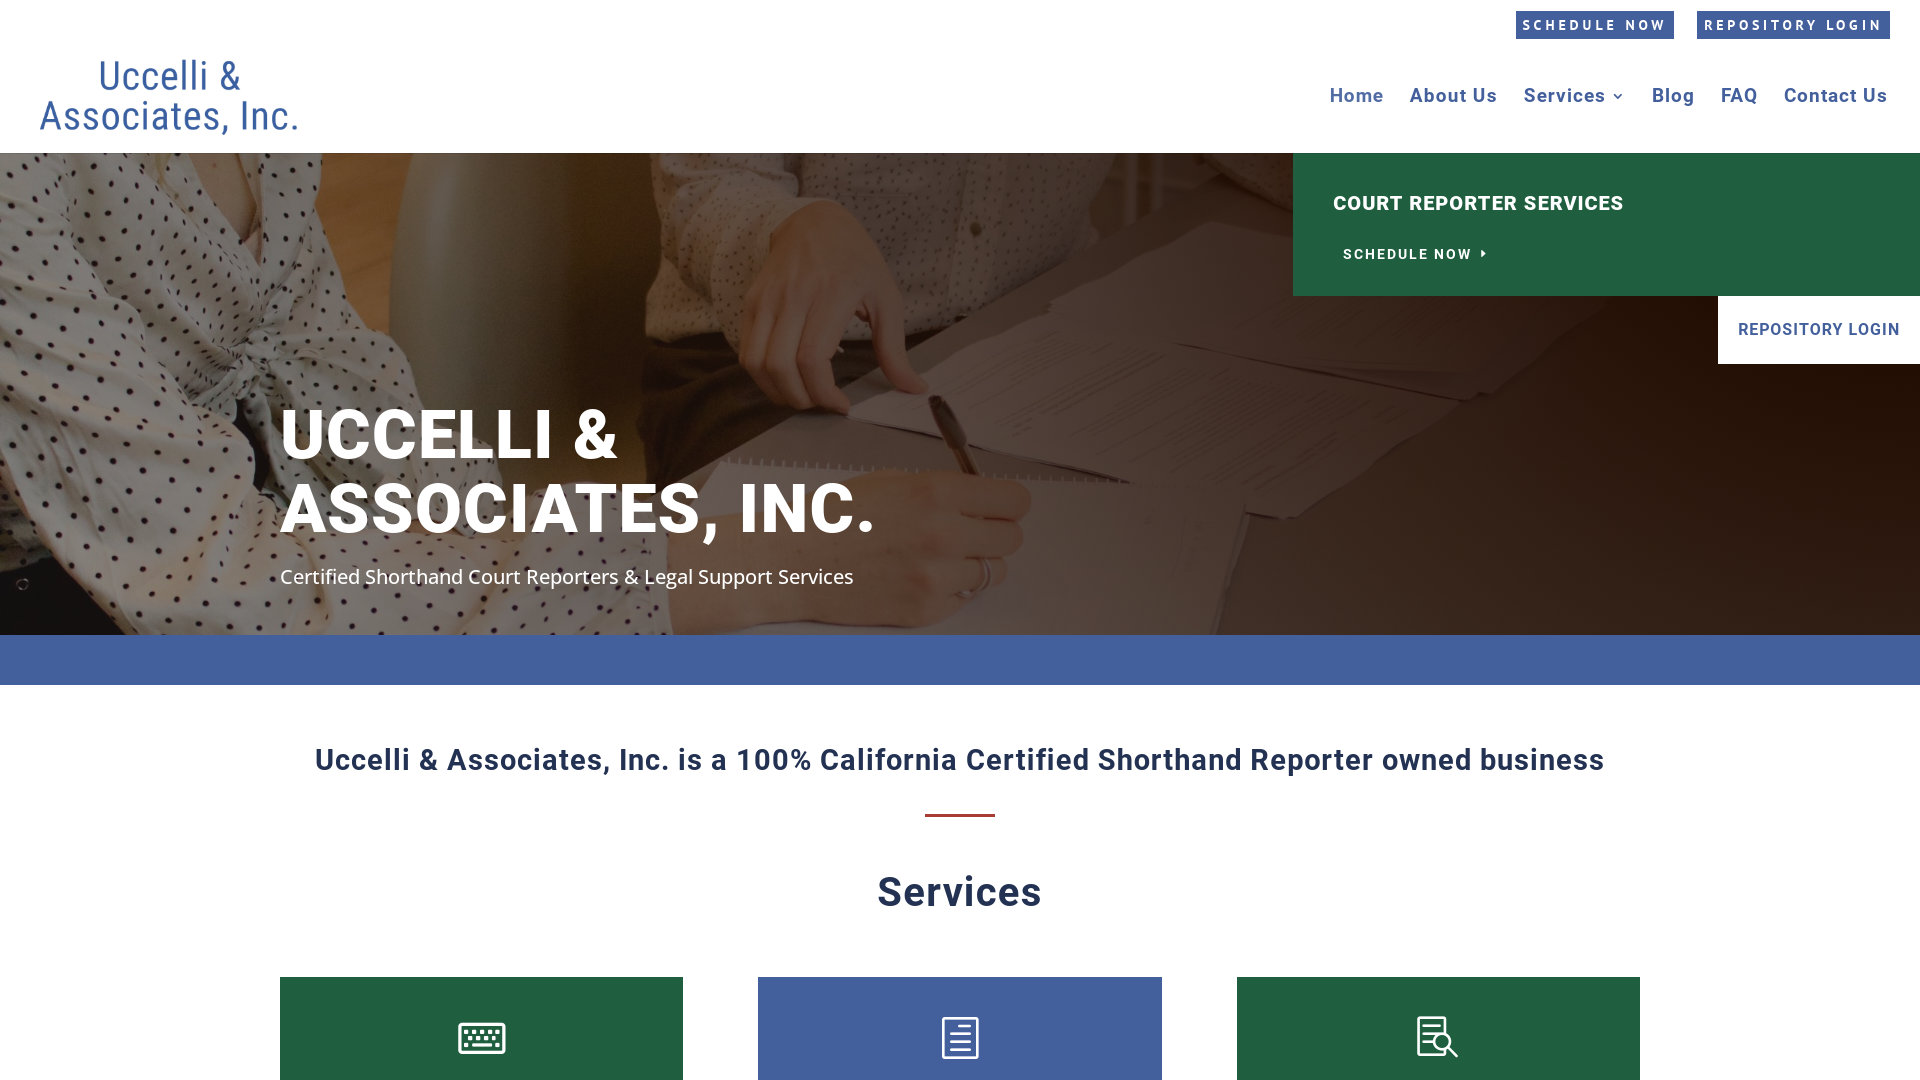 Uccelli & Associates _ Certified Shorthand Court Reporters & Legal Support Services